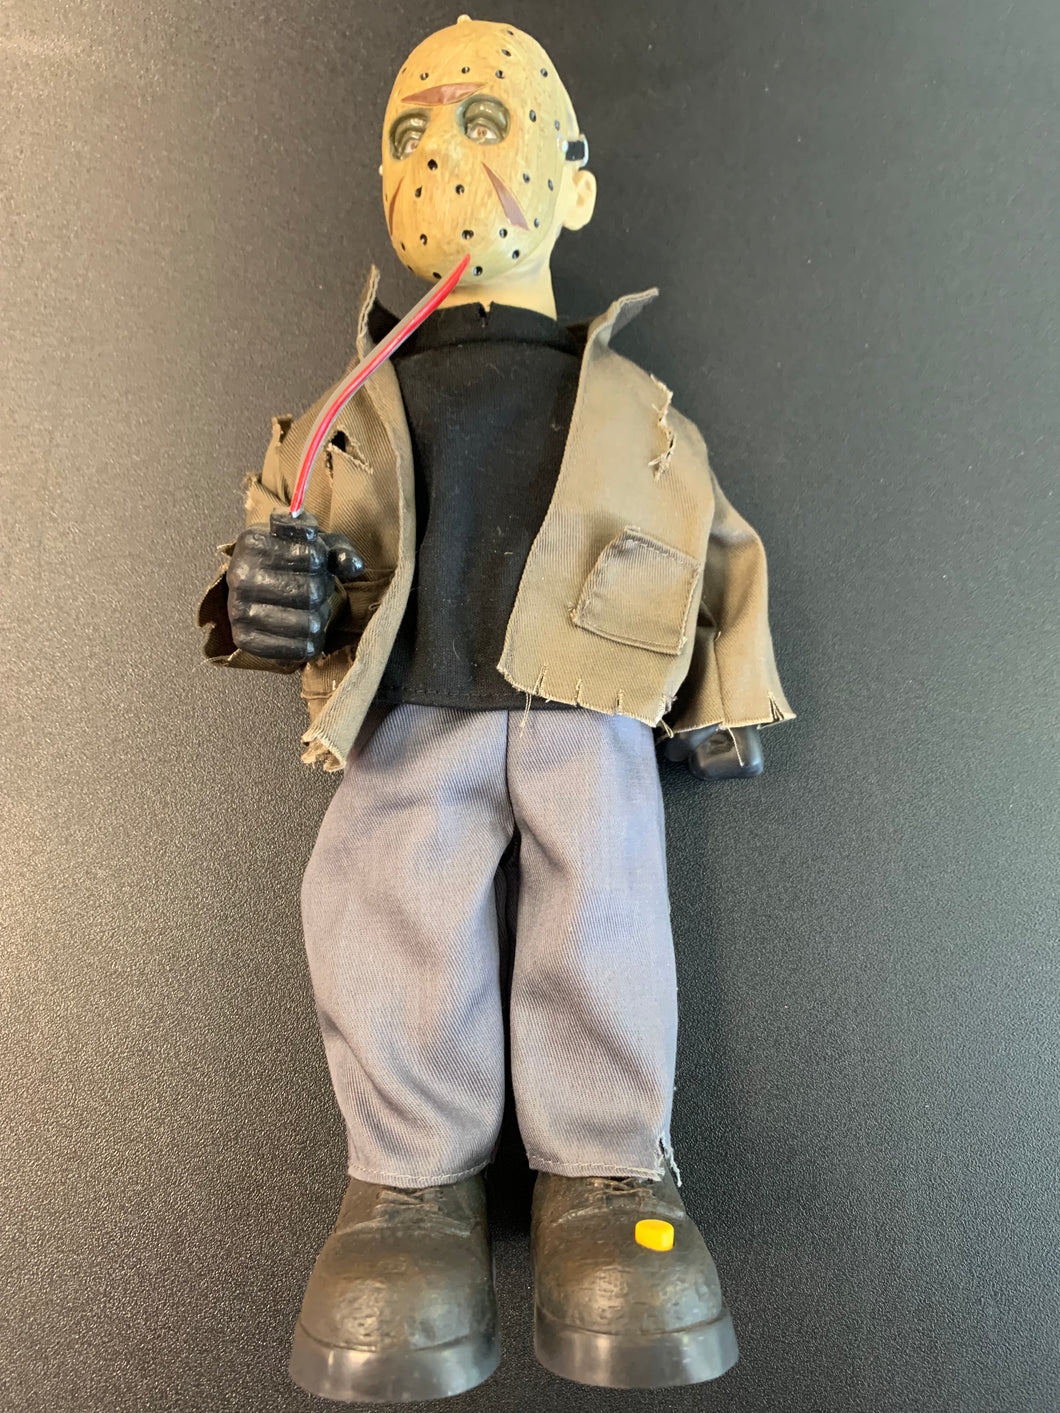 GEMMY HOUSE OF HORROR FRIDAY THE 13th JASON VORHEES 14” TALKING FIGURE